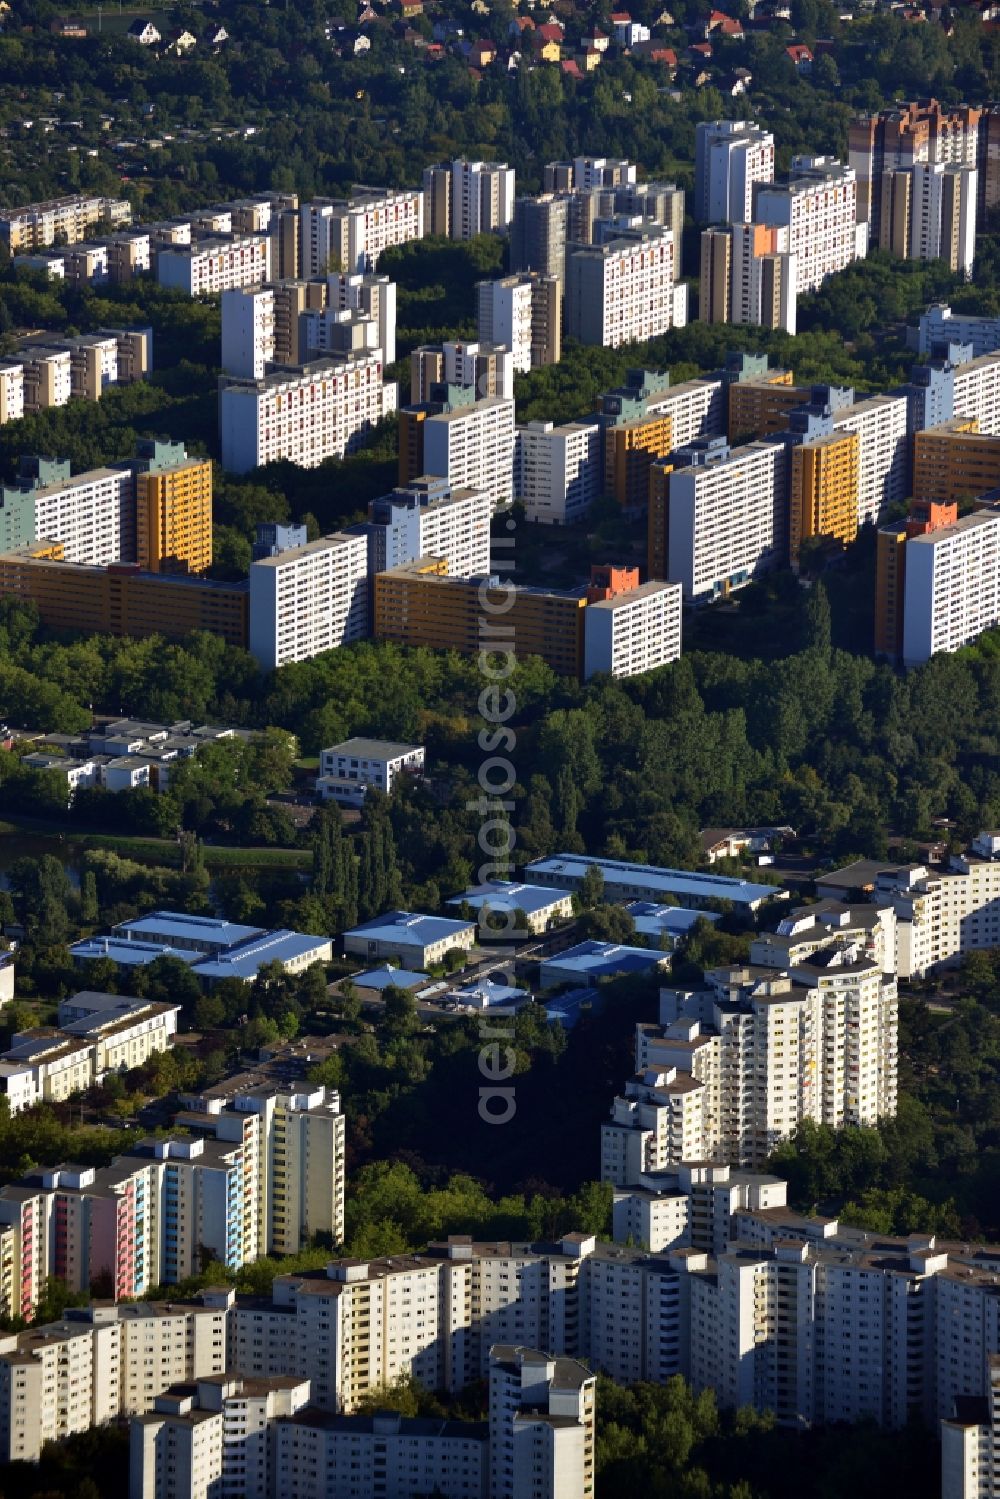 Aerial photograph Berlin OT Märkisches Viertel - View of apartment buildings in the housing complex of Maerkisches Viertel in Berlin